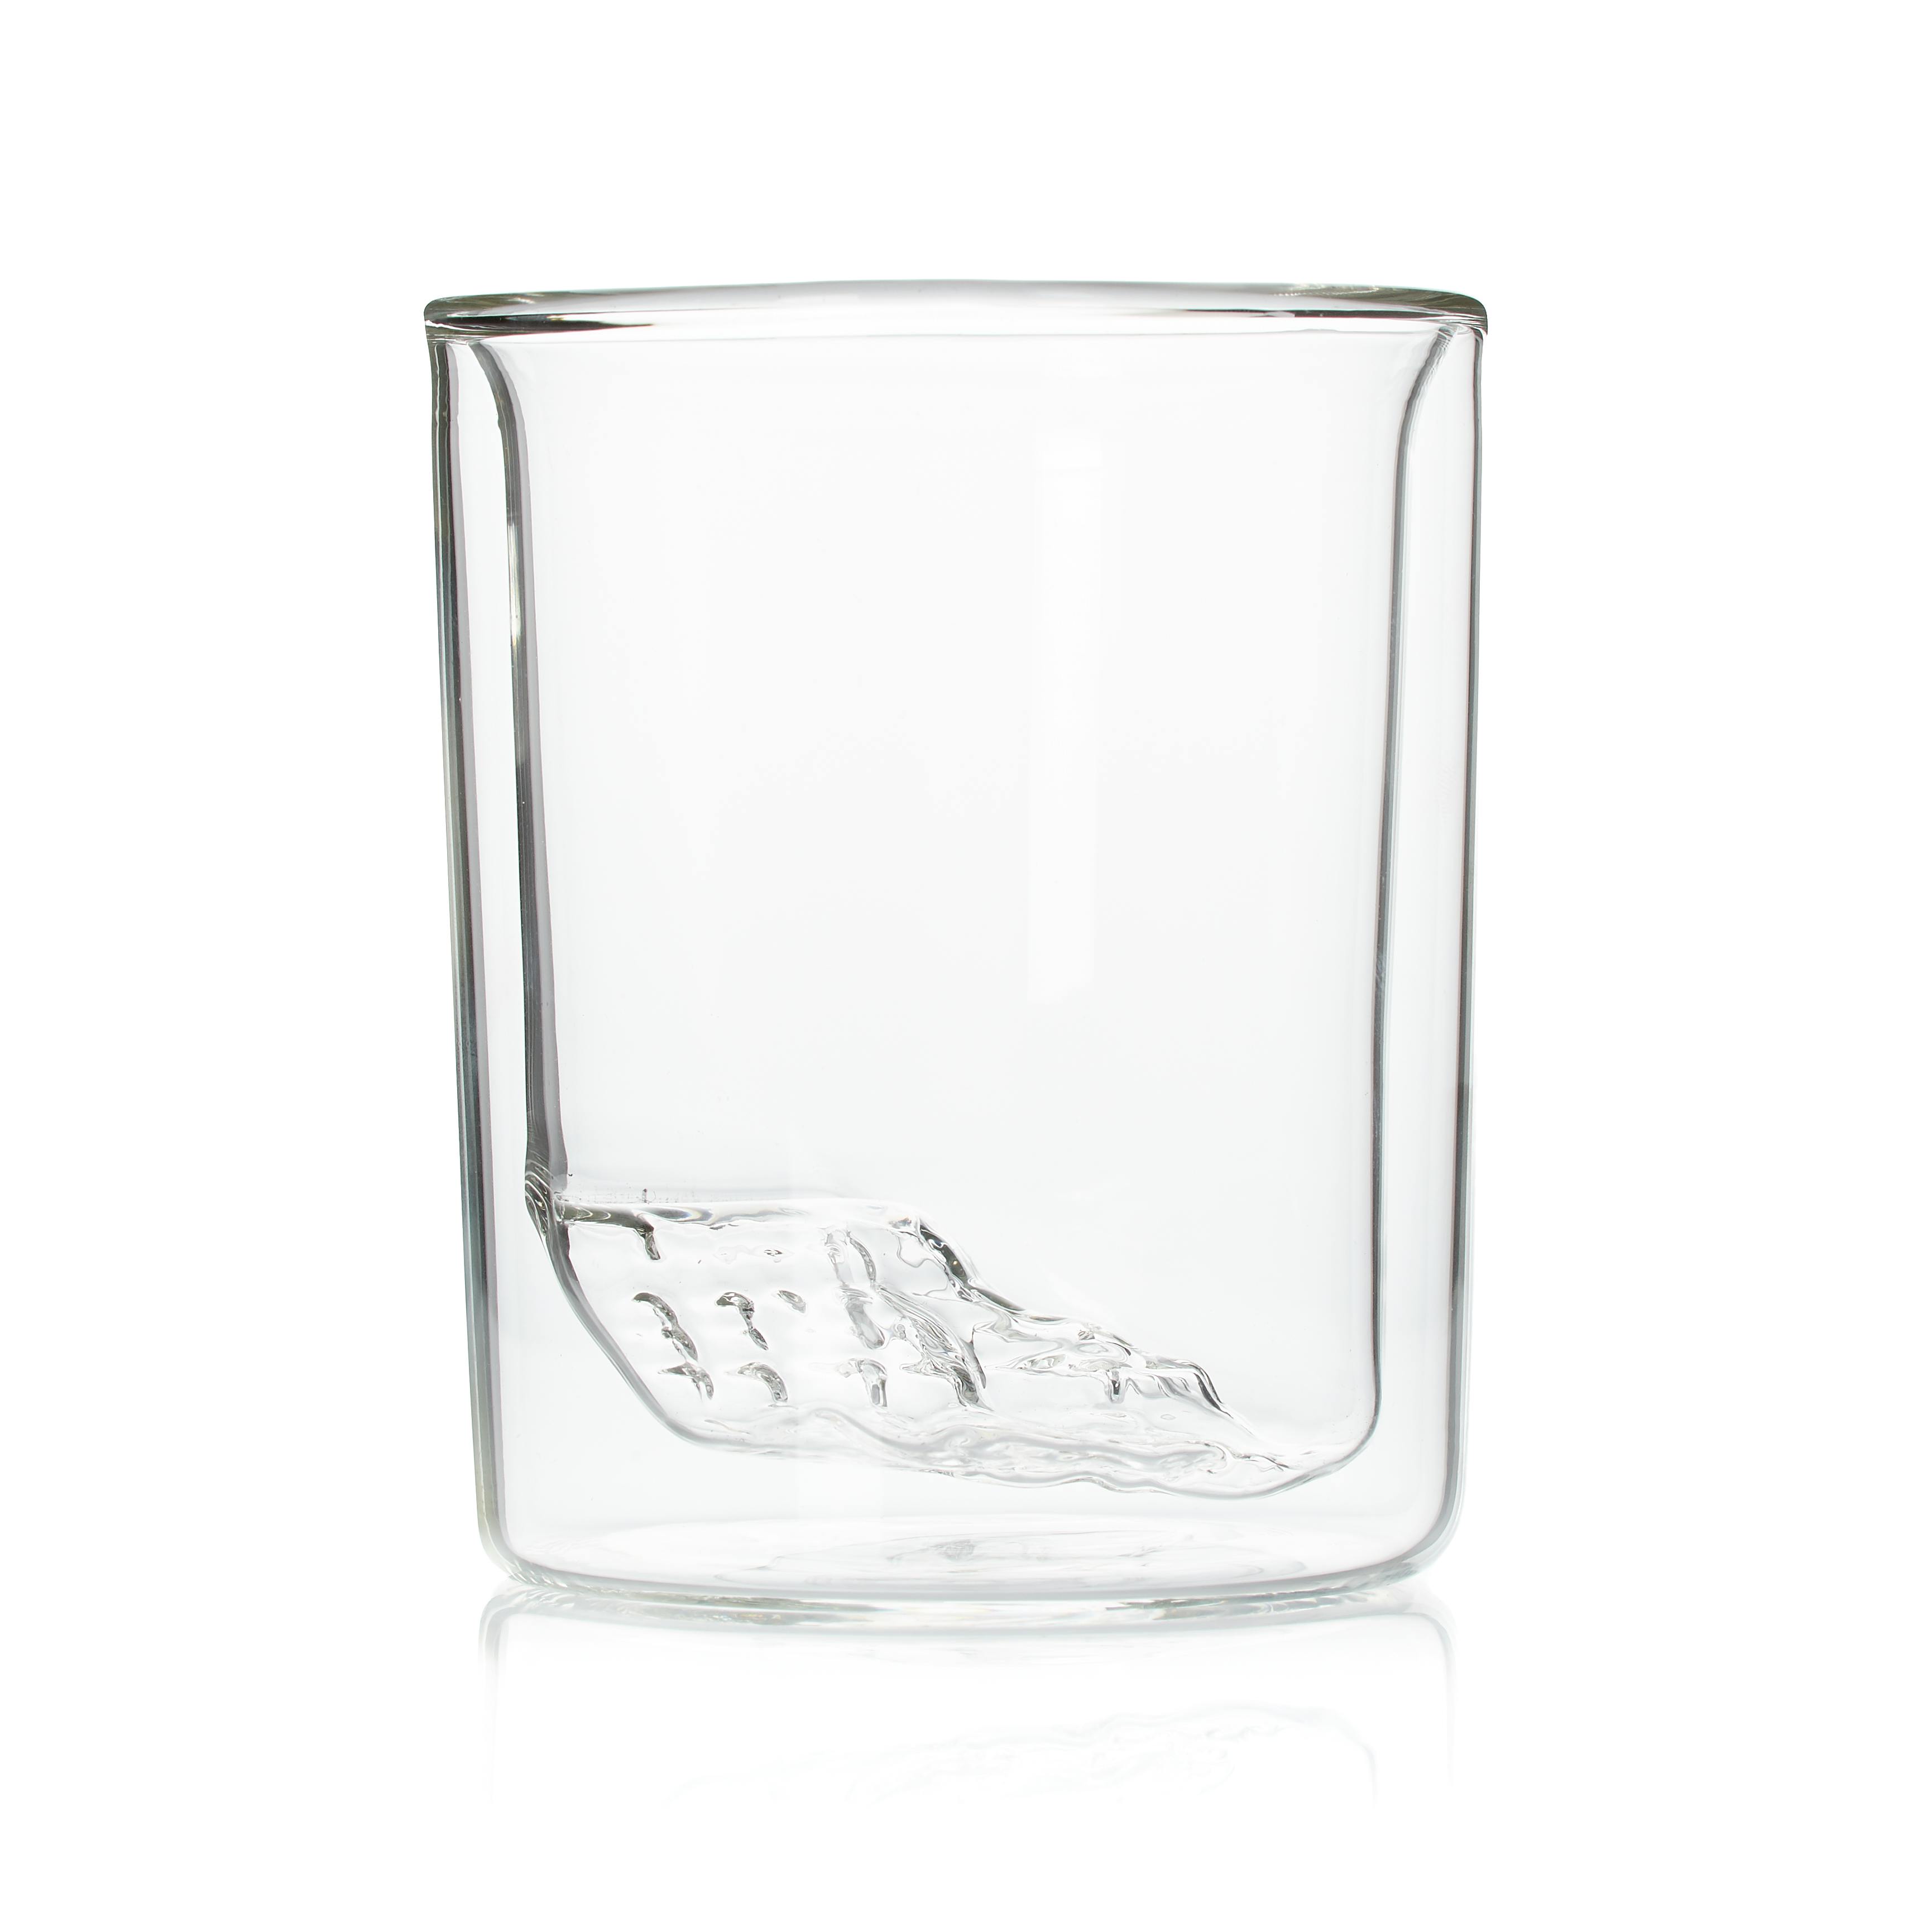 Mountain Whiskey Chilling Glasses - Set of 2, Everest, Grand Canyon